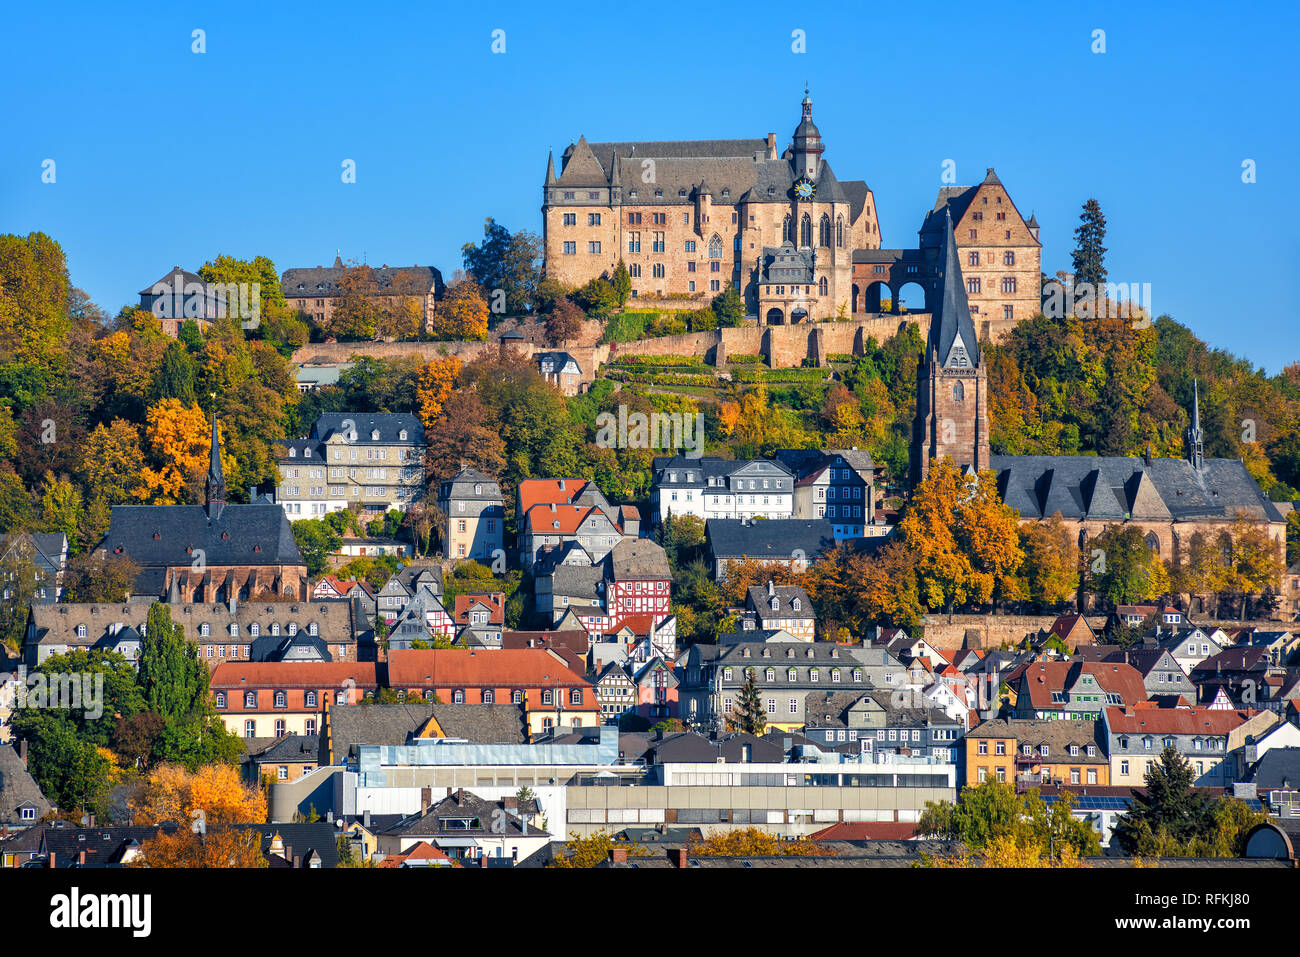 Marburg an der Lahn historical Old Town with castle Landgrafenschloss, St. Elizabeth church and medieval colorful half-timbered houses, Germany Stock Photo